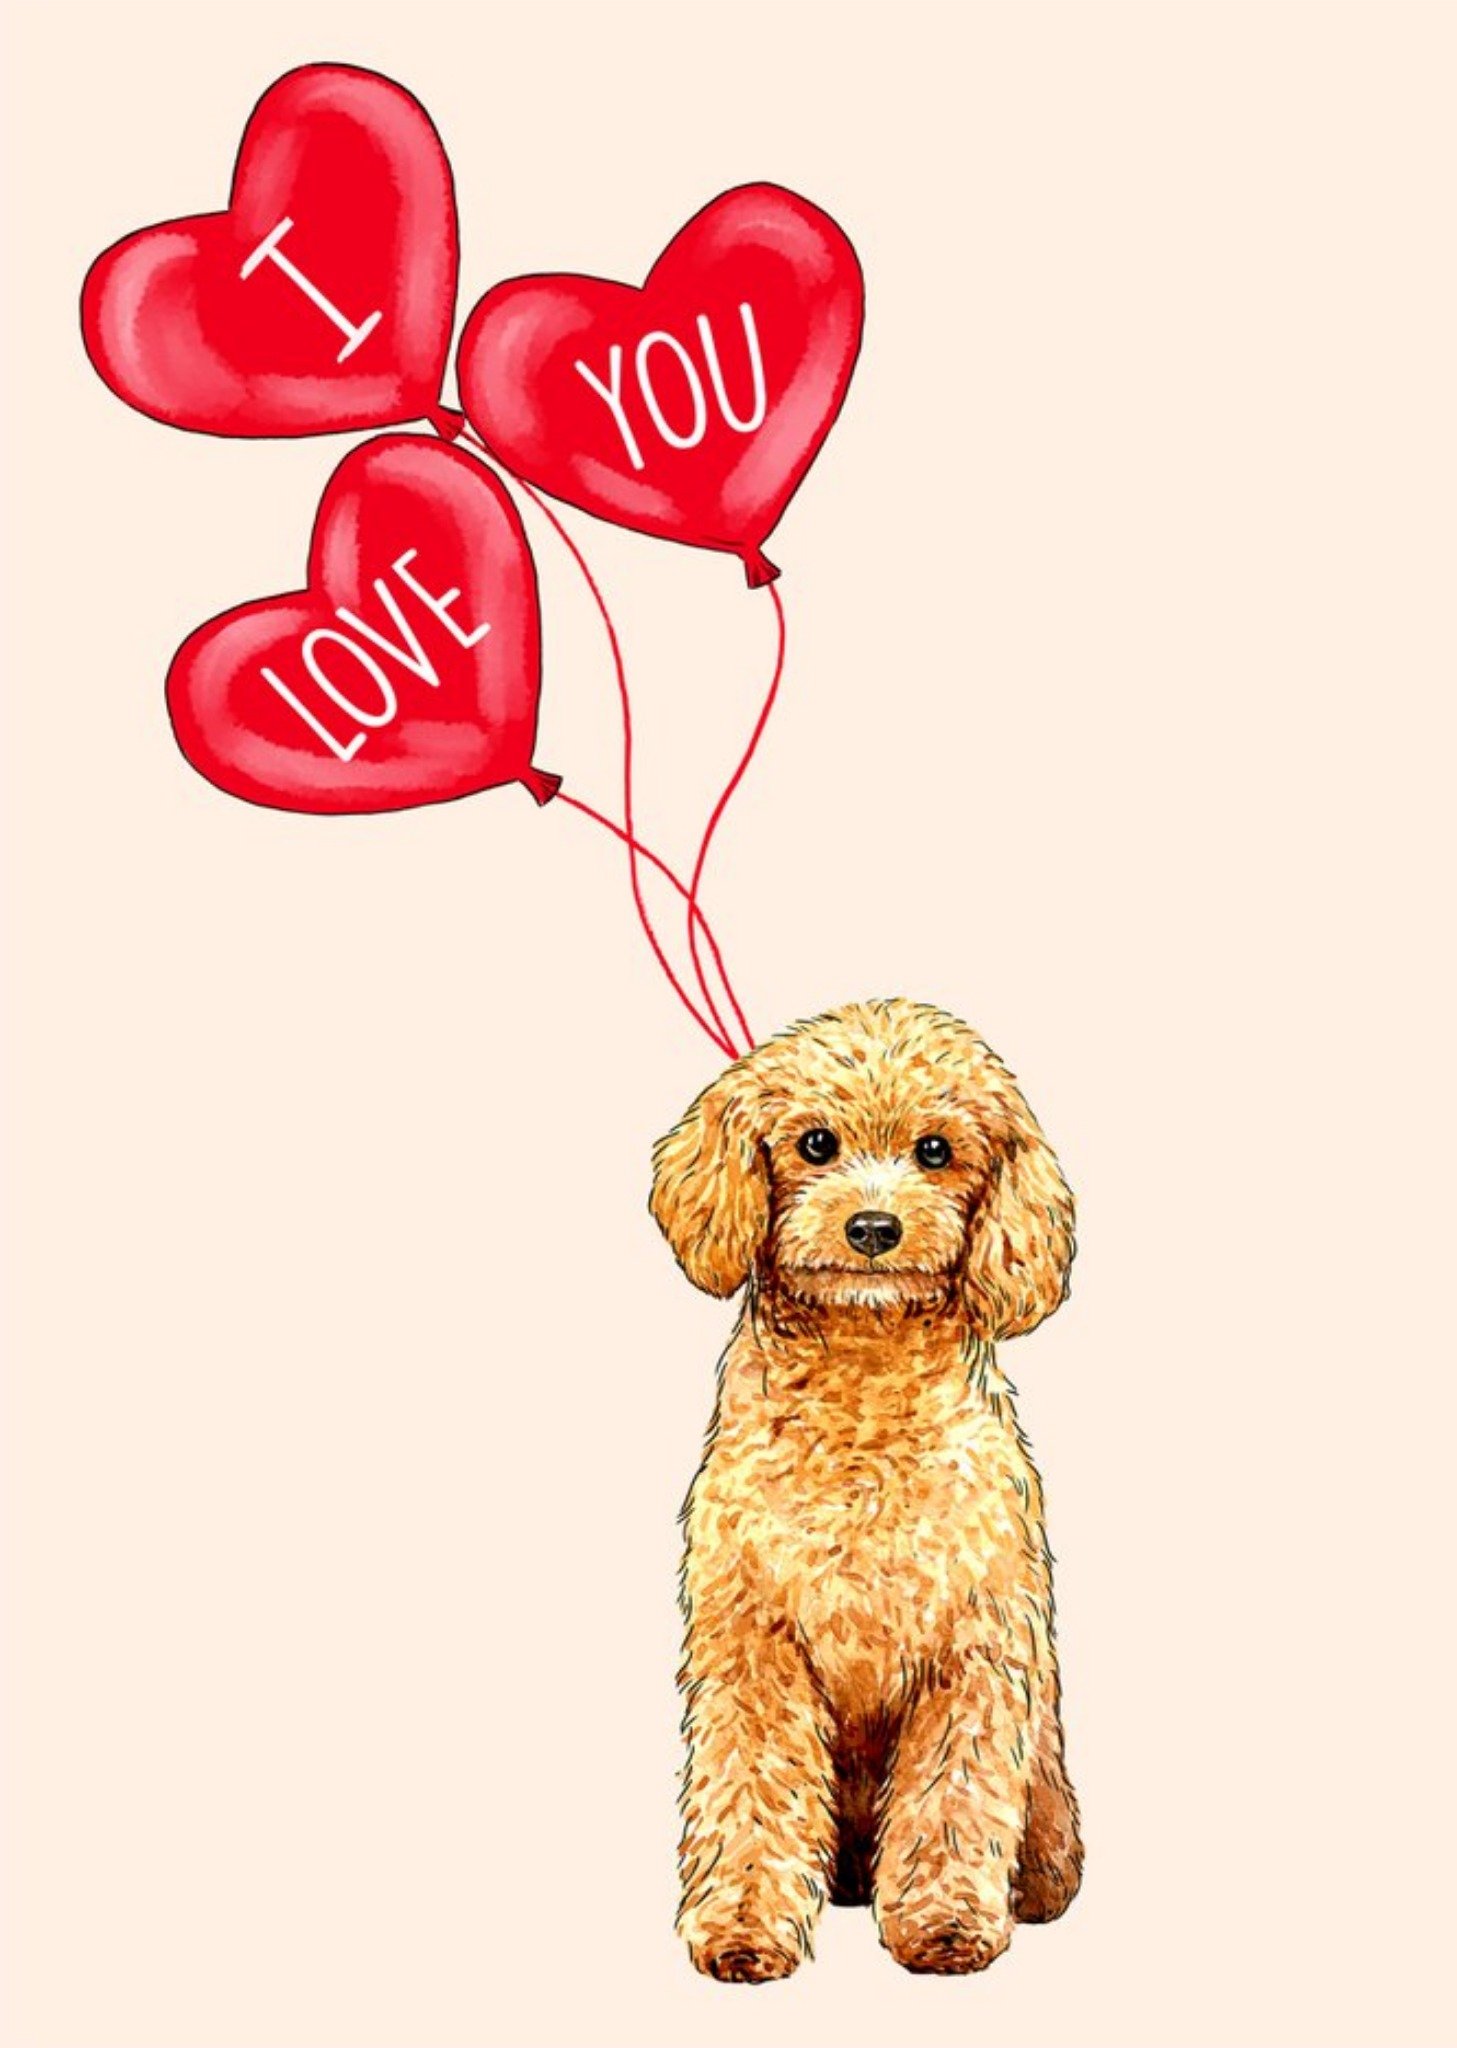 Moonpig Poppy And Mabel Illustration Of A Cockapoo And Loveheart Balloons. I Love You Card, Large